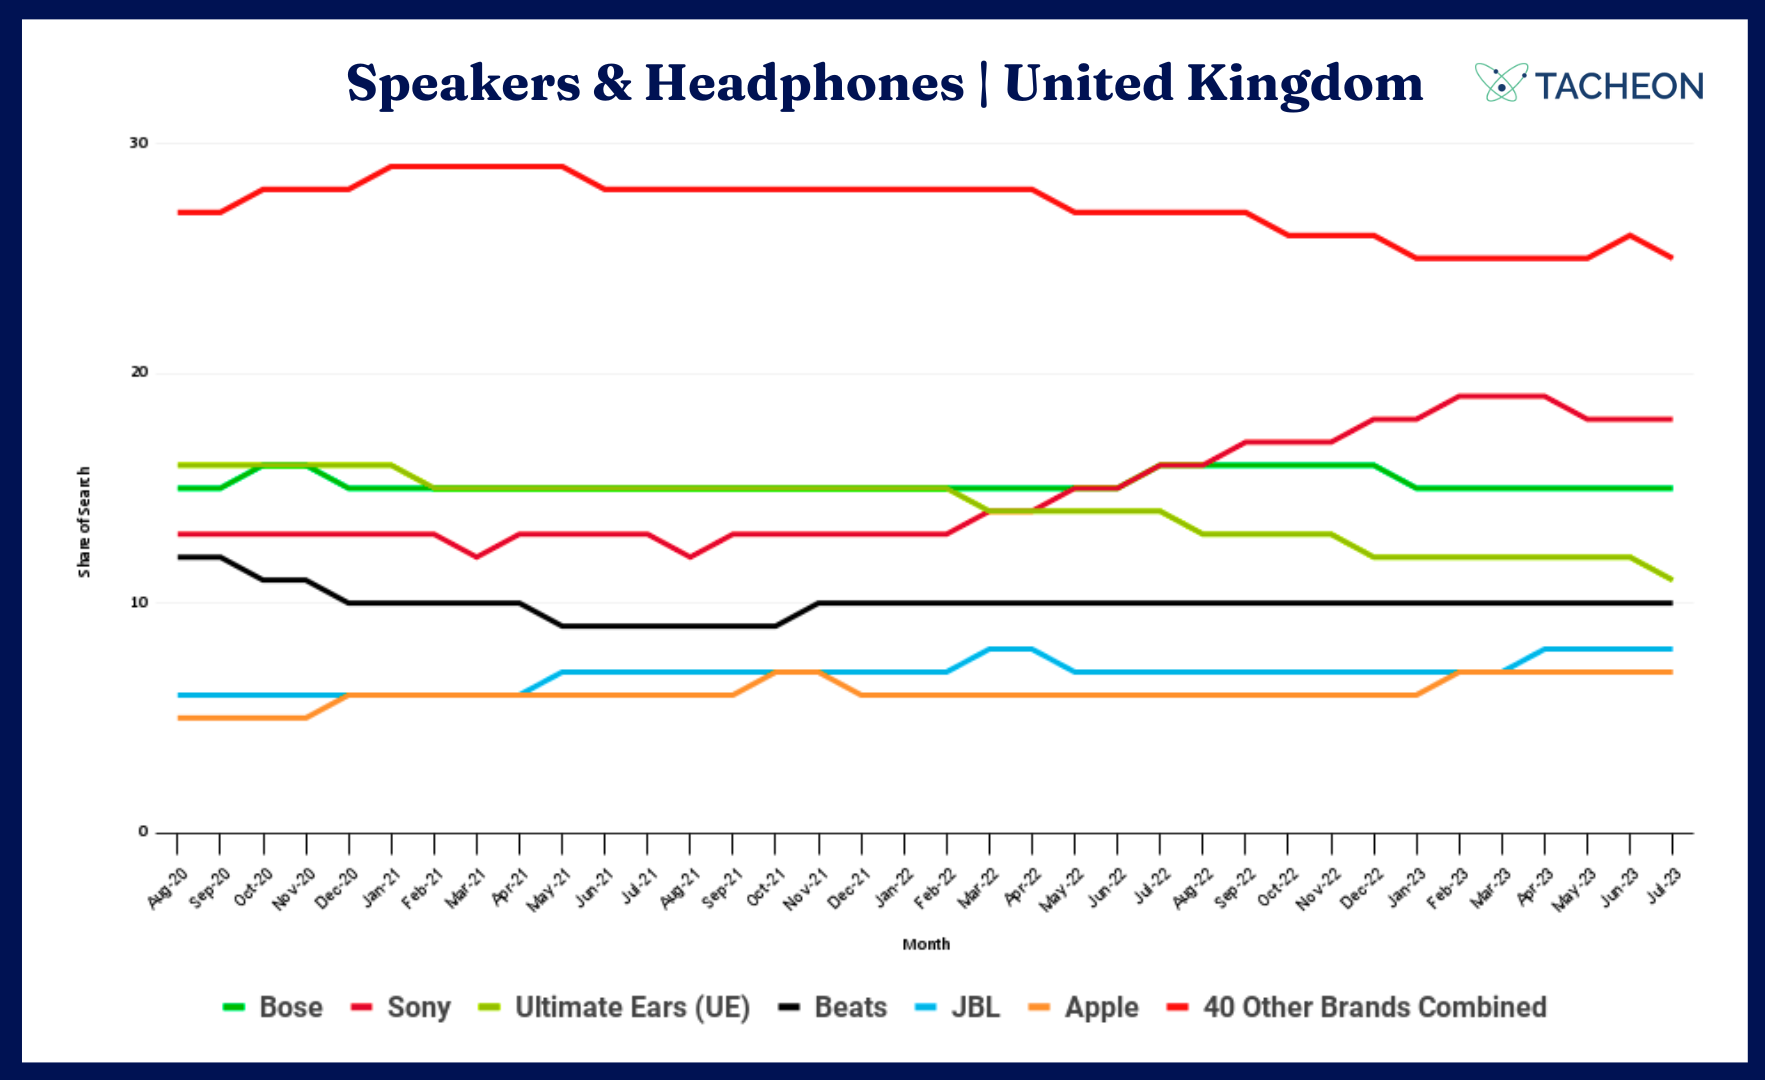 Share of Search Dashboard Speakers Headphones Category UK